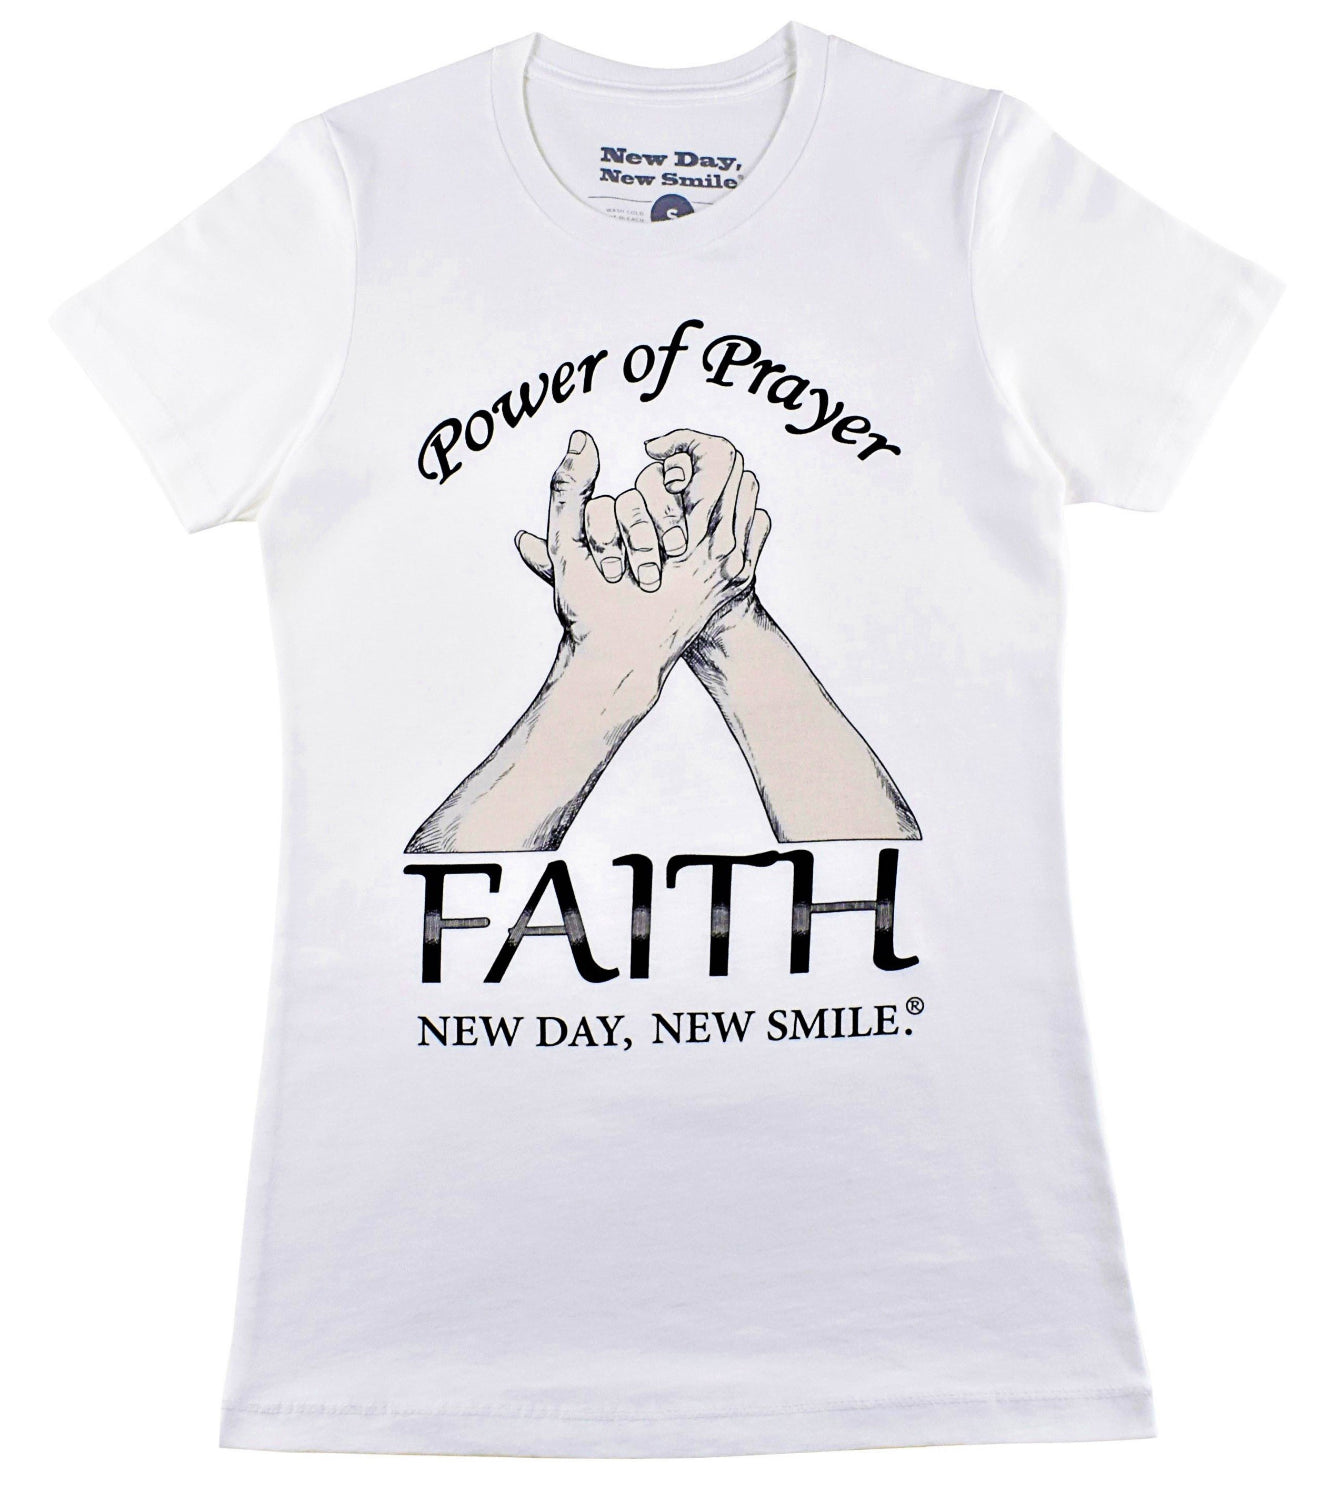 New Day New Smile Power Of Prayer - Faith Inspirational Women's T-Shirt available at NewDayNewSmile.com